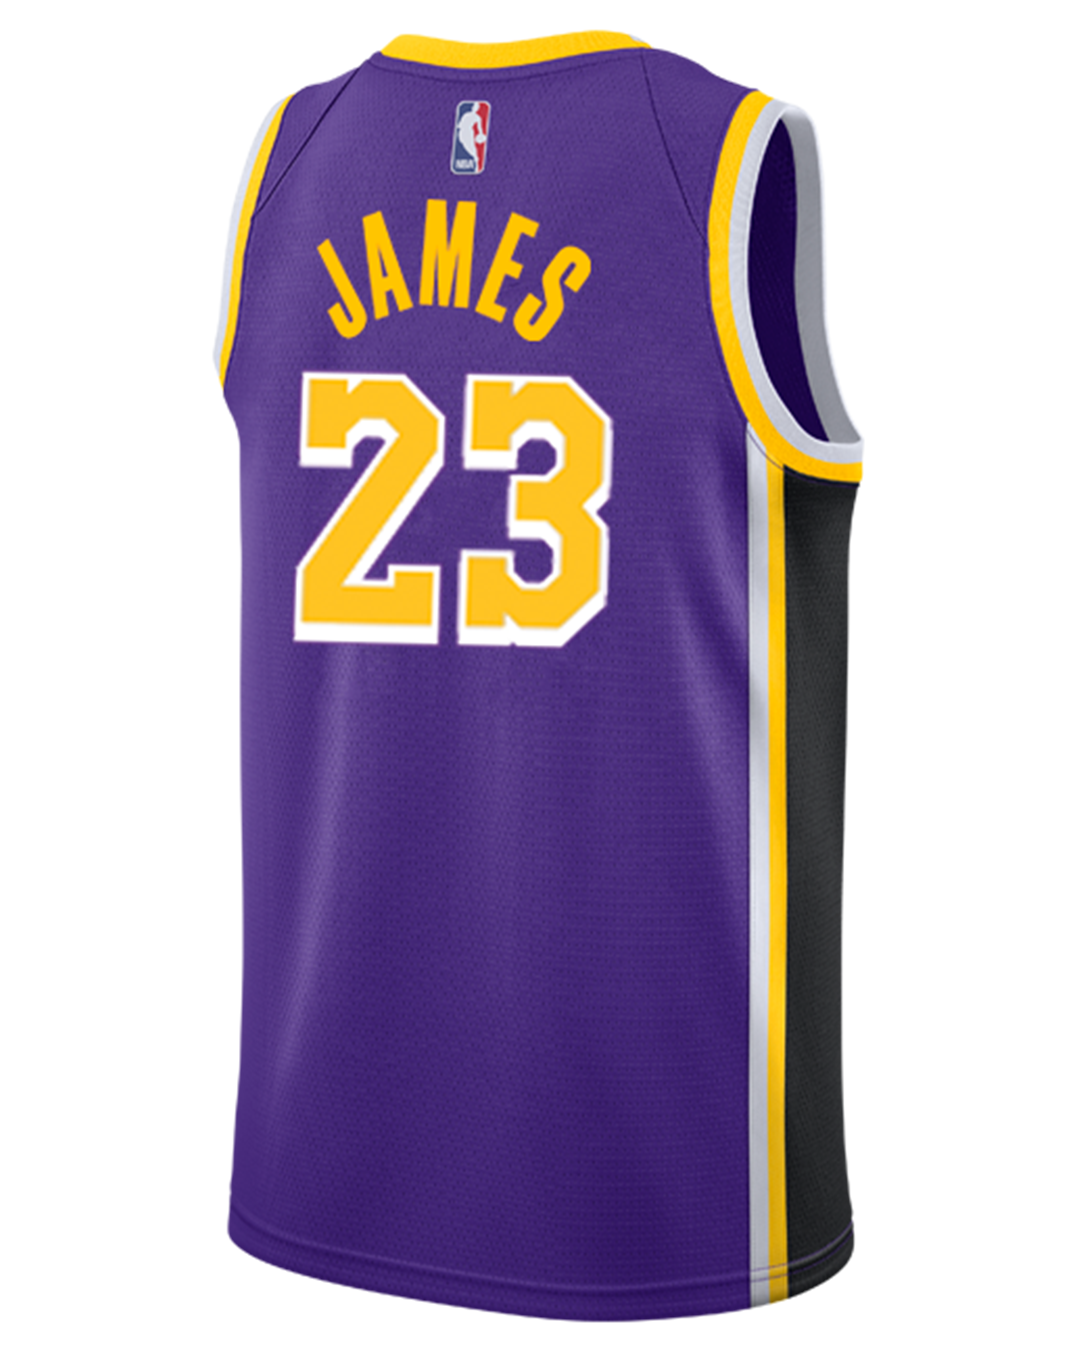 Los Angeles Lakers LeBron James Statement Edition Swingman Jersey - Lakers Store